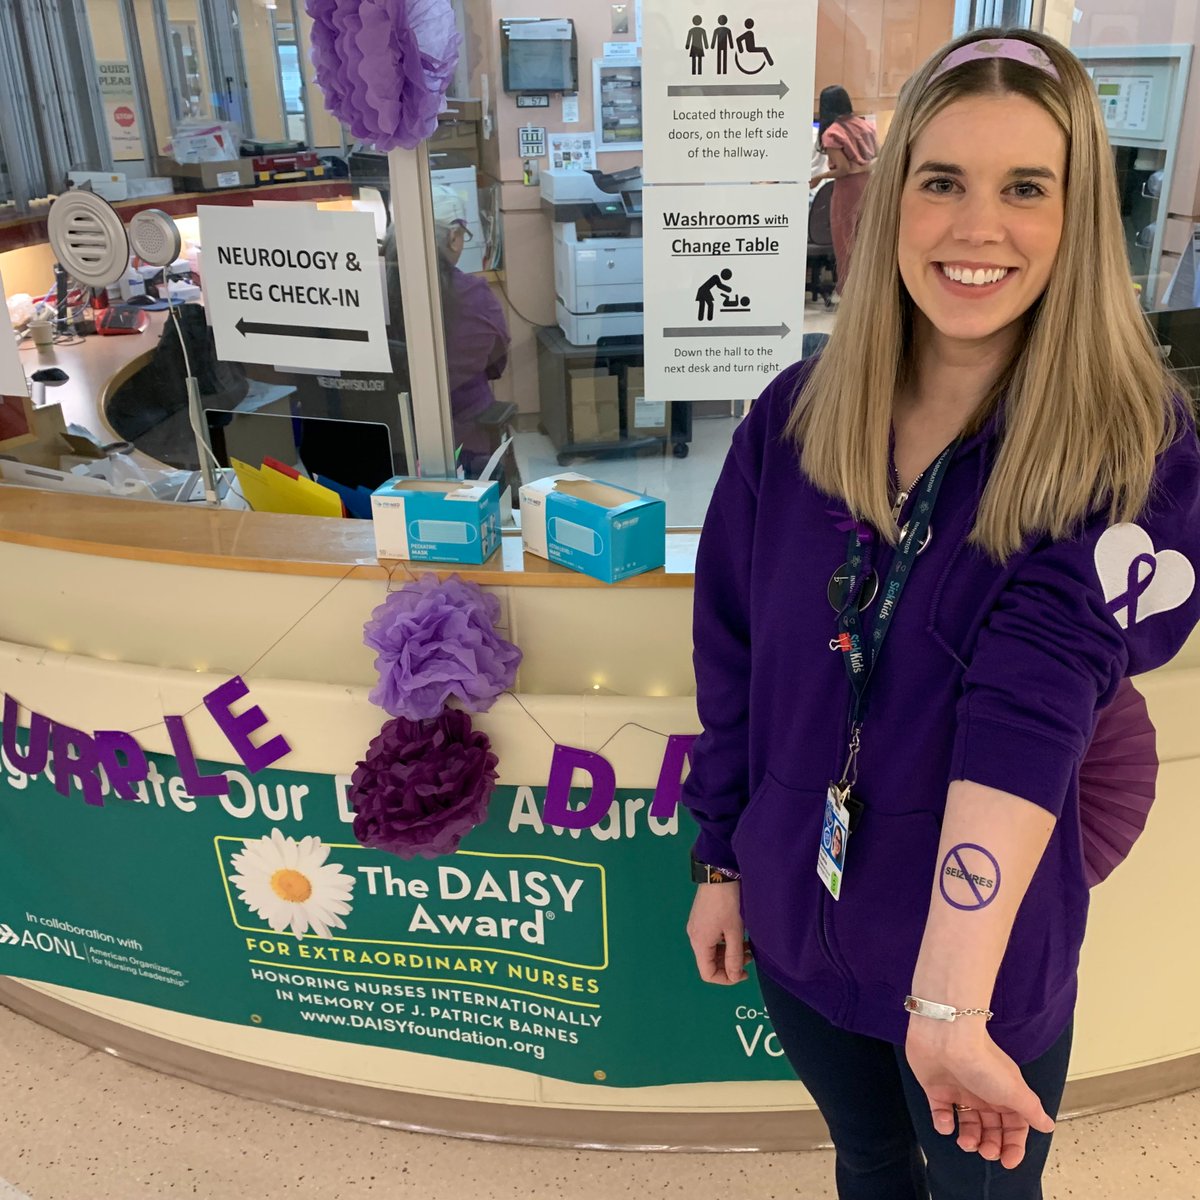 Sydney, Registered #Nurse, Neurology Clinic, shares how her experience living with #epilepsy can help patients who are facing a diagnosis. 'I share what it's like to have epilepsy in the real world, what patients can do to be safe and to live their lives as fully as possible.'